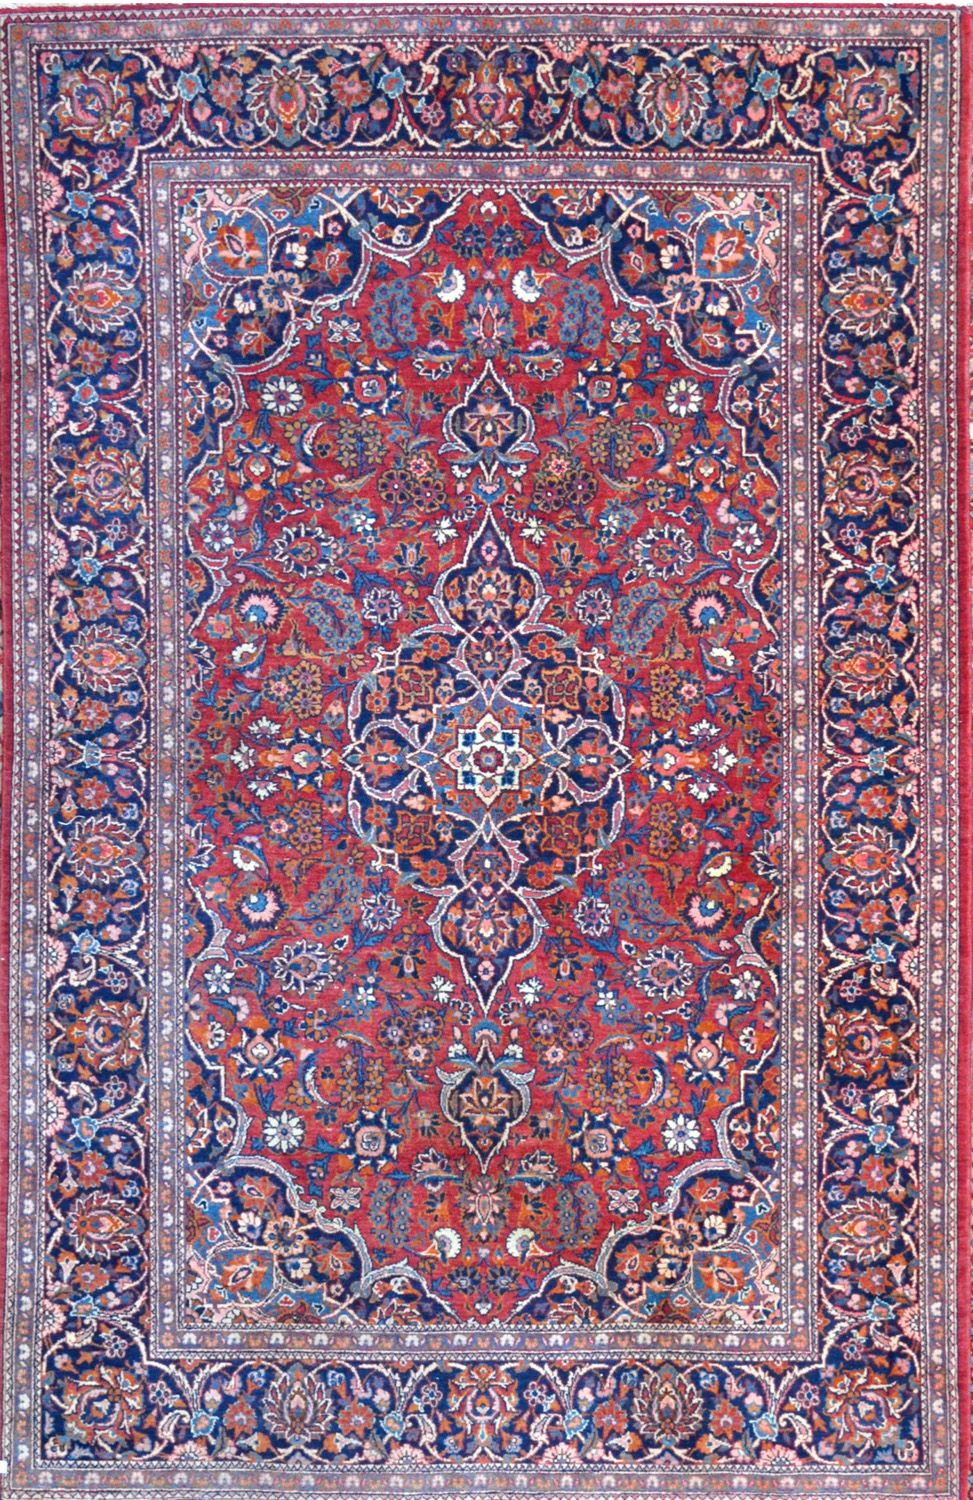 Null Fine and old kachan kork

Iran

Middle XX 

Dimensions 210 x 135 cm

Techni&hellip;